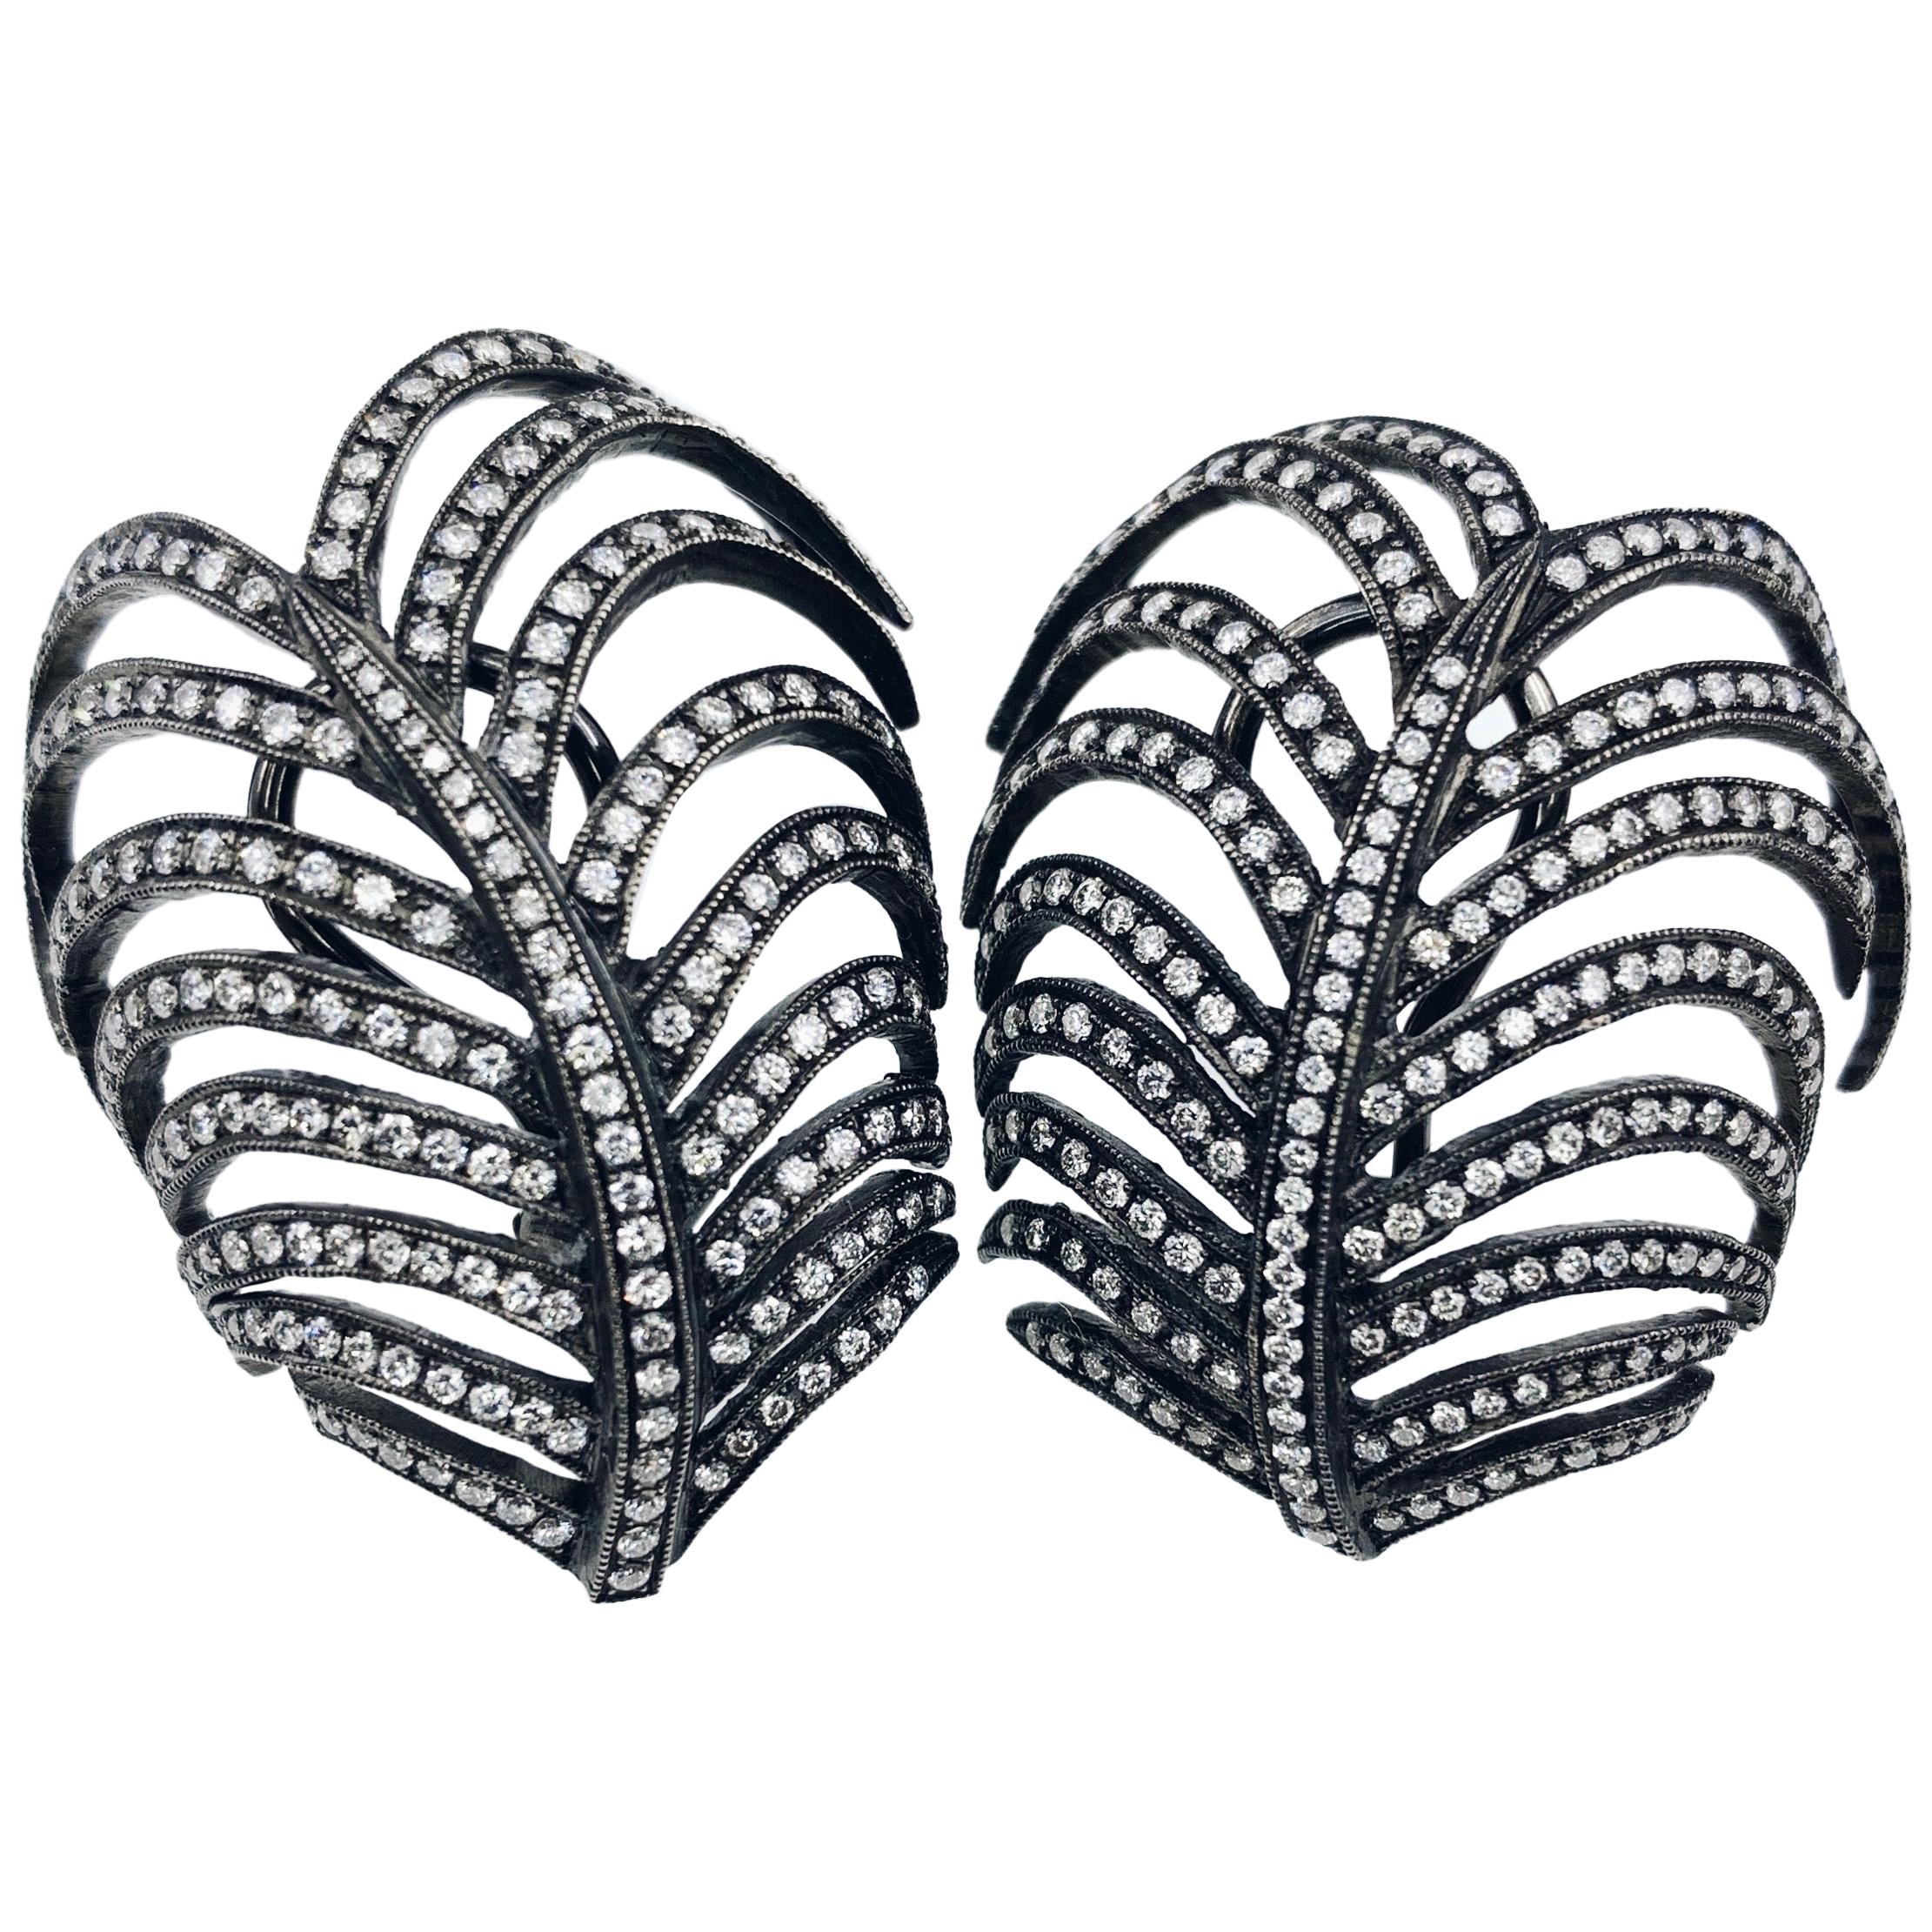 3.55 Carat "Kentia Palm" Diamond Earrings in Black Rhodium Over White Gold For Sale